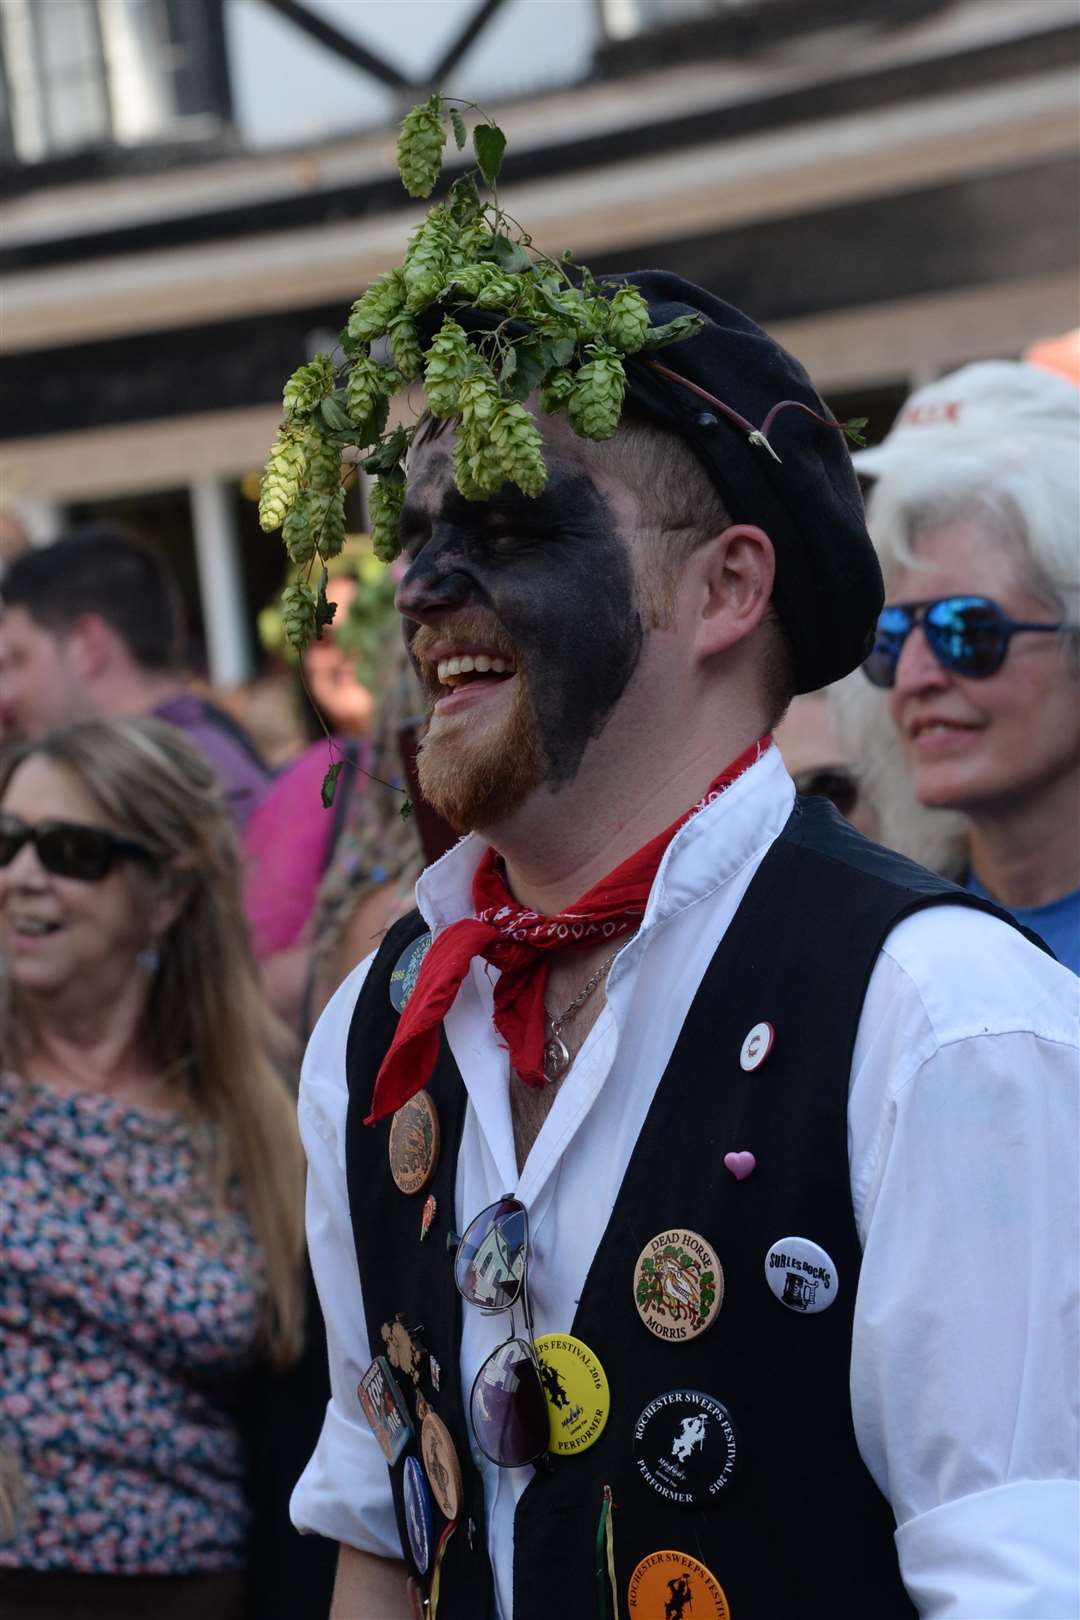 Stuart Shannon takes a break from morris dancing to watch Foot Down performing on the market place stage.